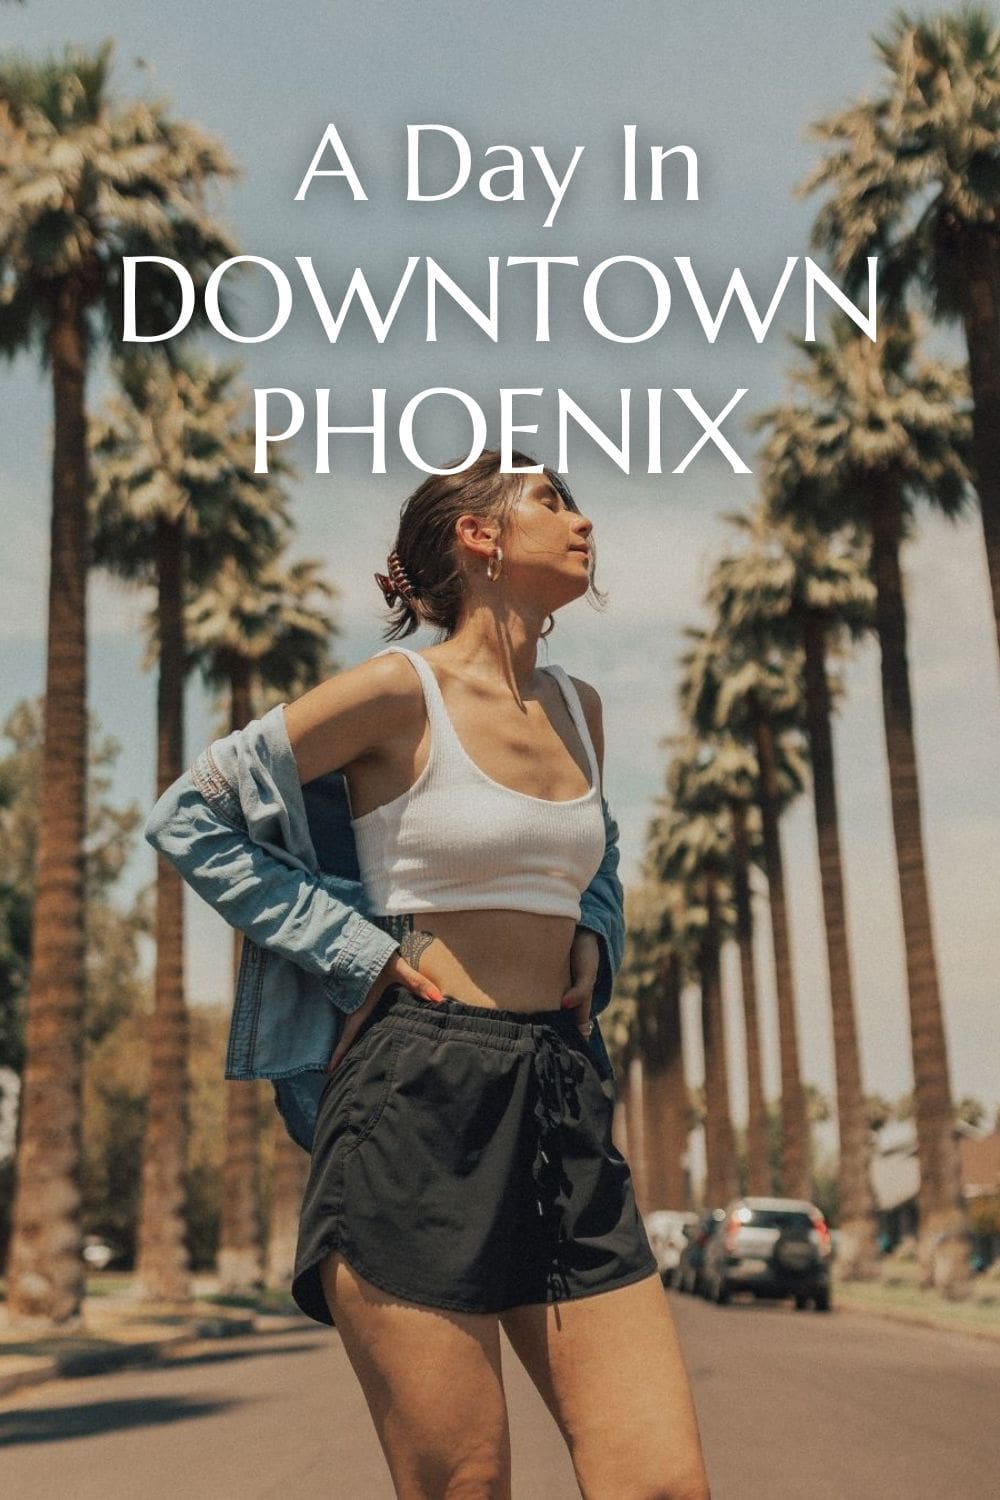 A Day in Downtown Phoenix